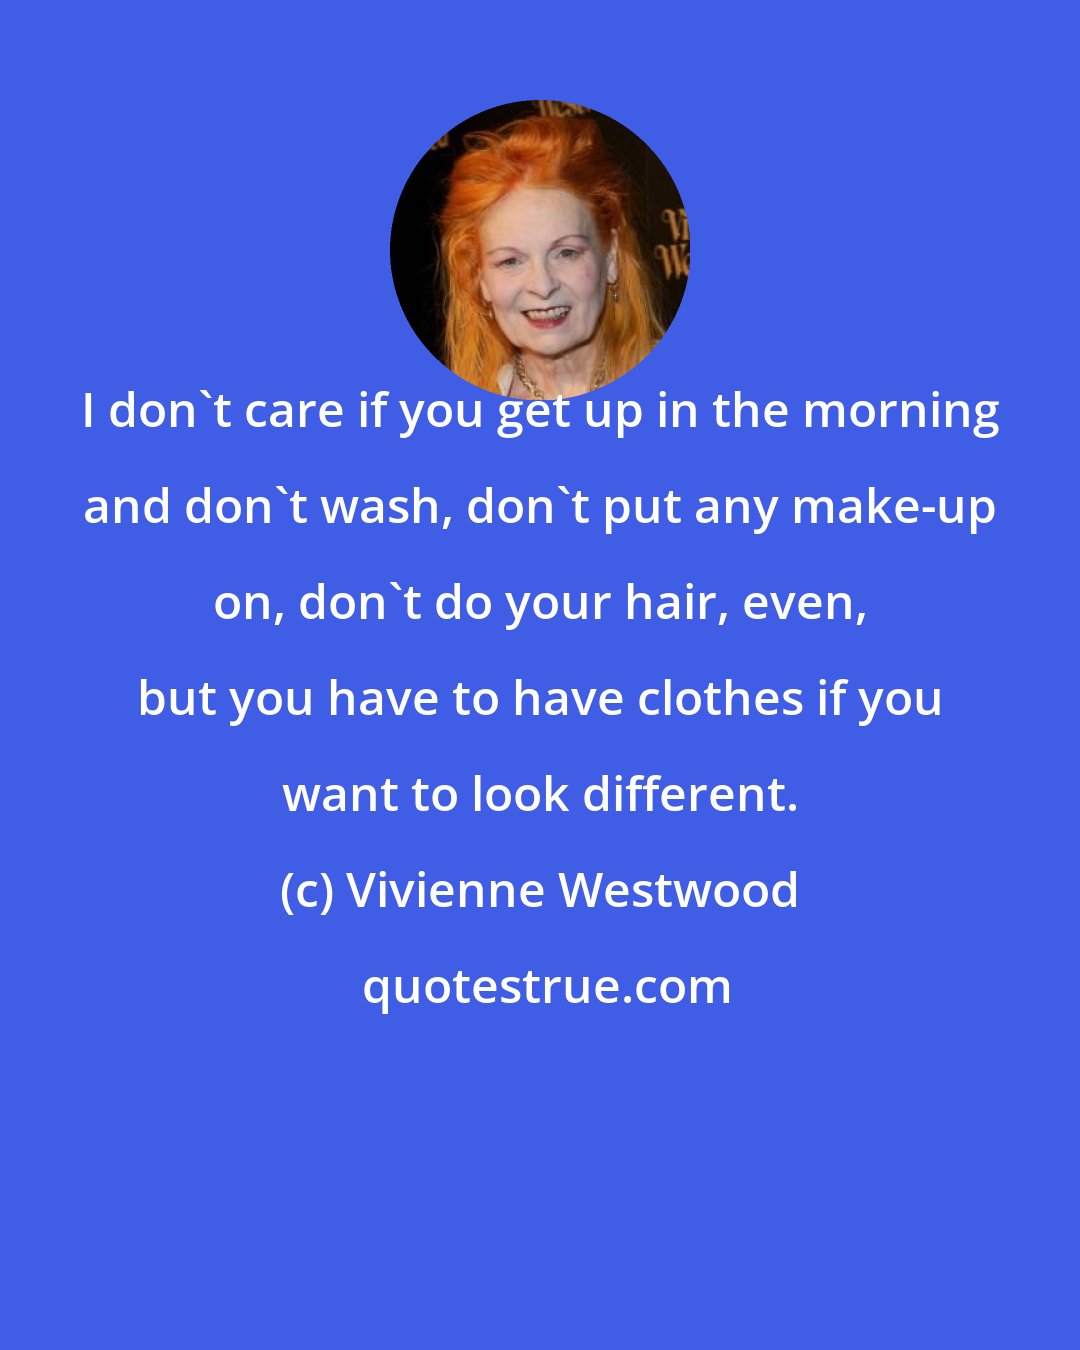 Vivienne Westwood: I don't care if you get up in the morning and don't wash, don't put any make-up on, don't do your hair, even, but you have to have clothes if you want to look different.